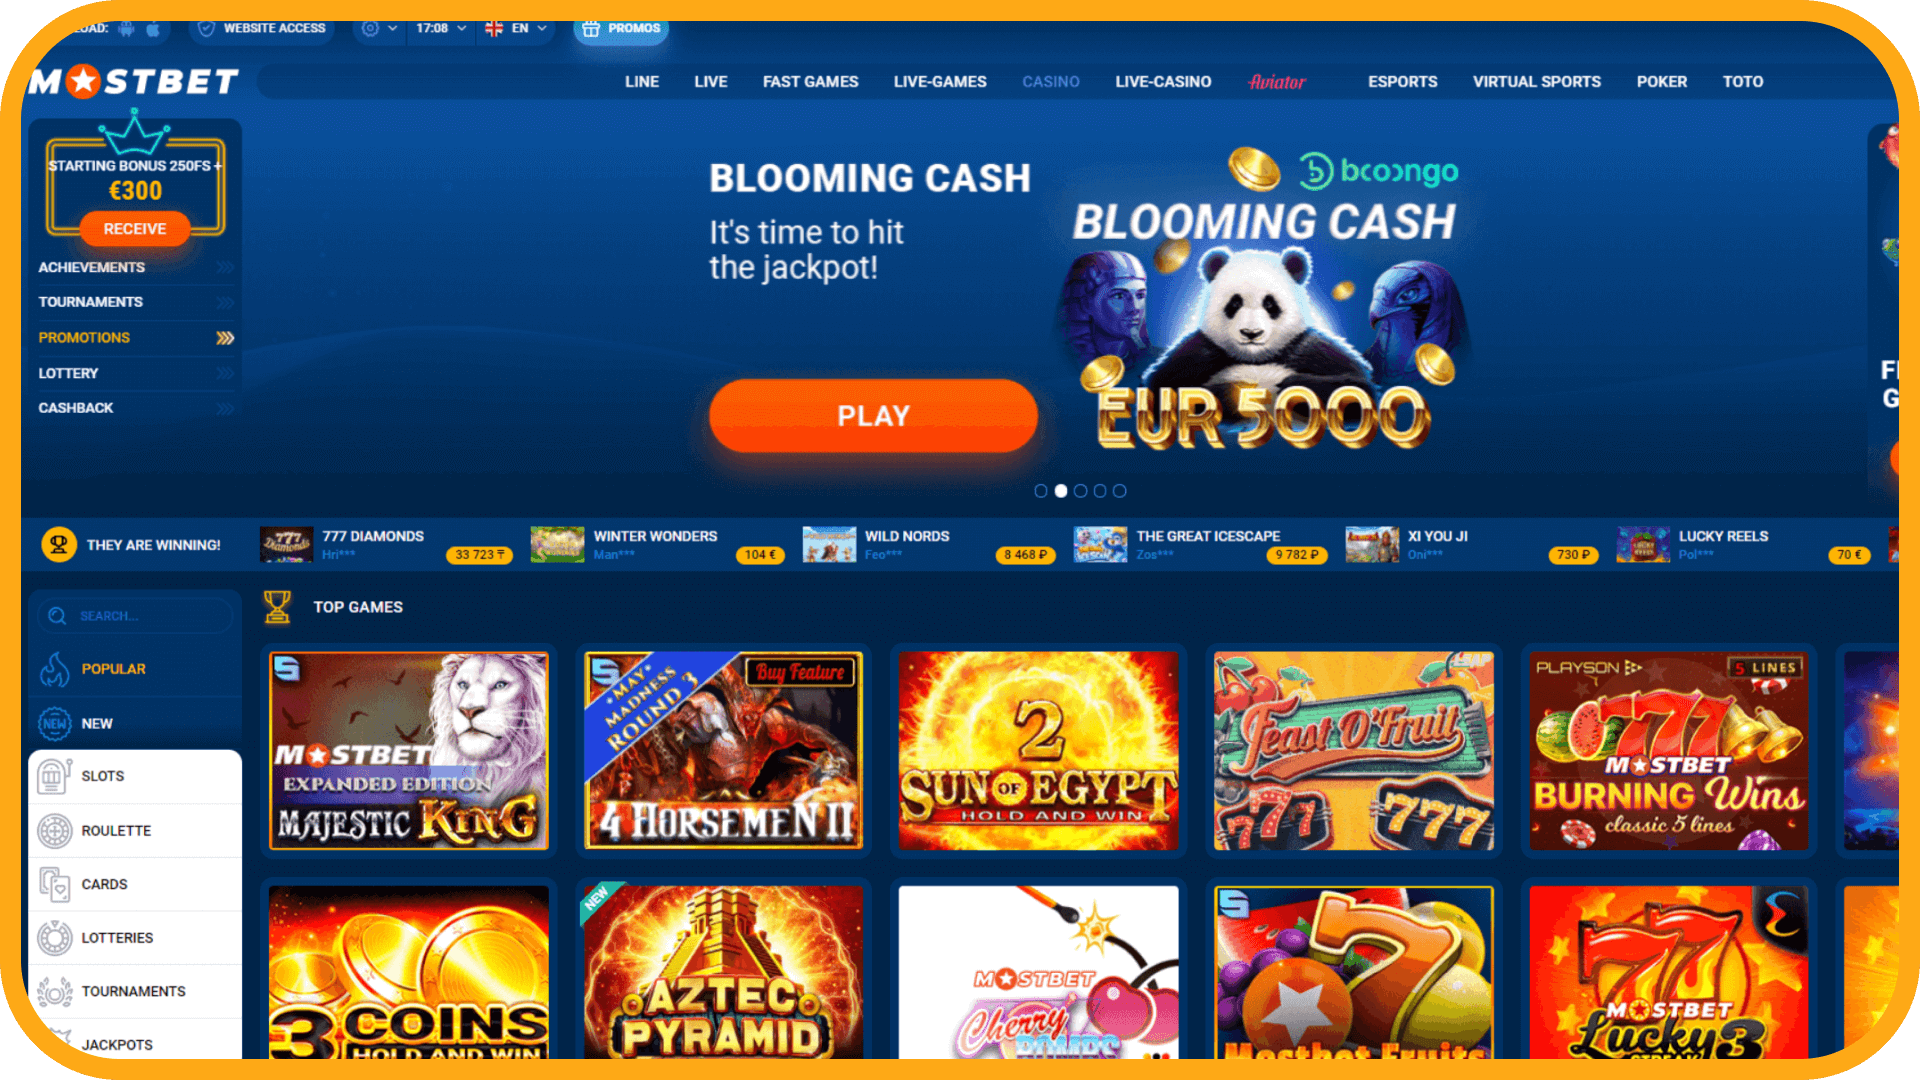 Marriage And Mostbet Betting and Casino in Egypt Exclusive Bonus EGP 2500 + 250 Free Spins Have More In Common Than You Think